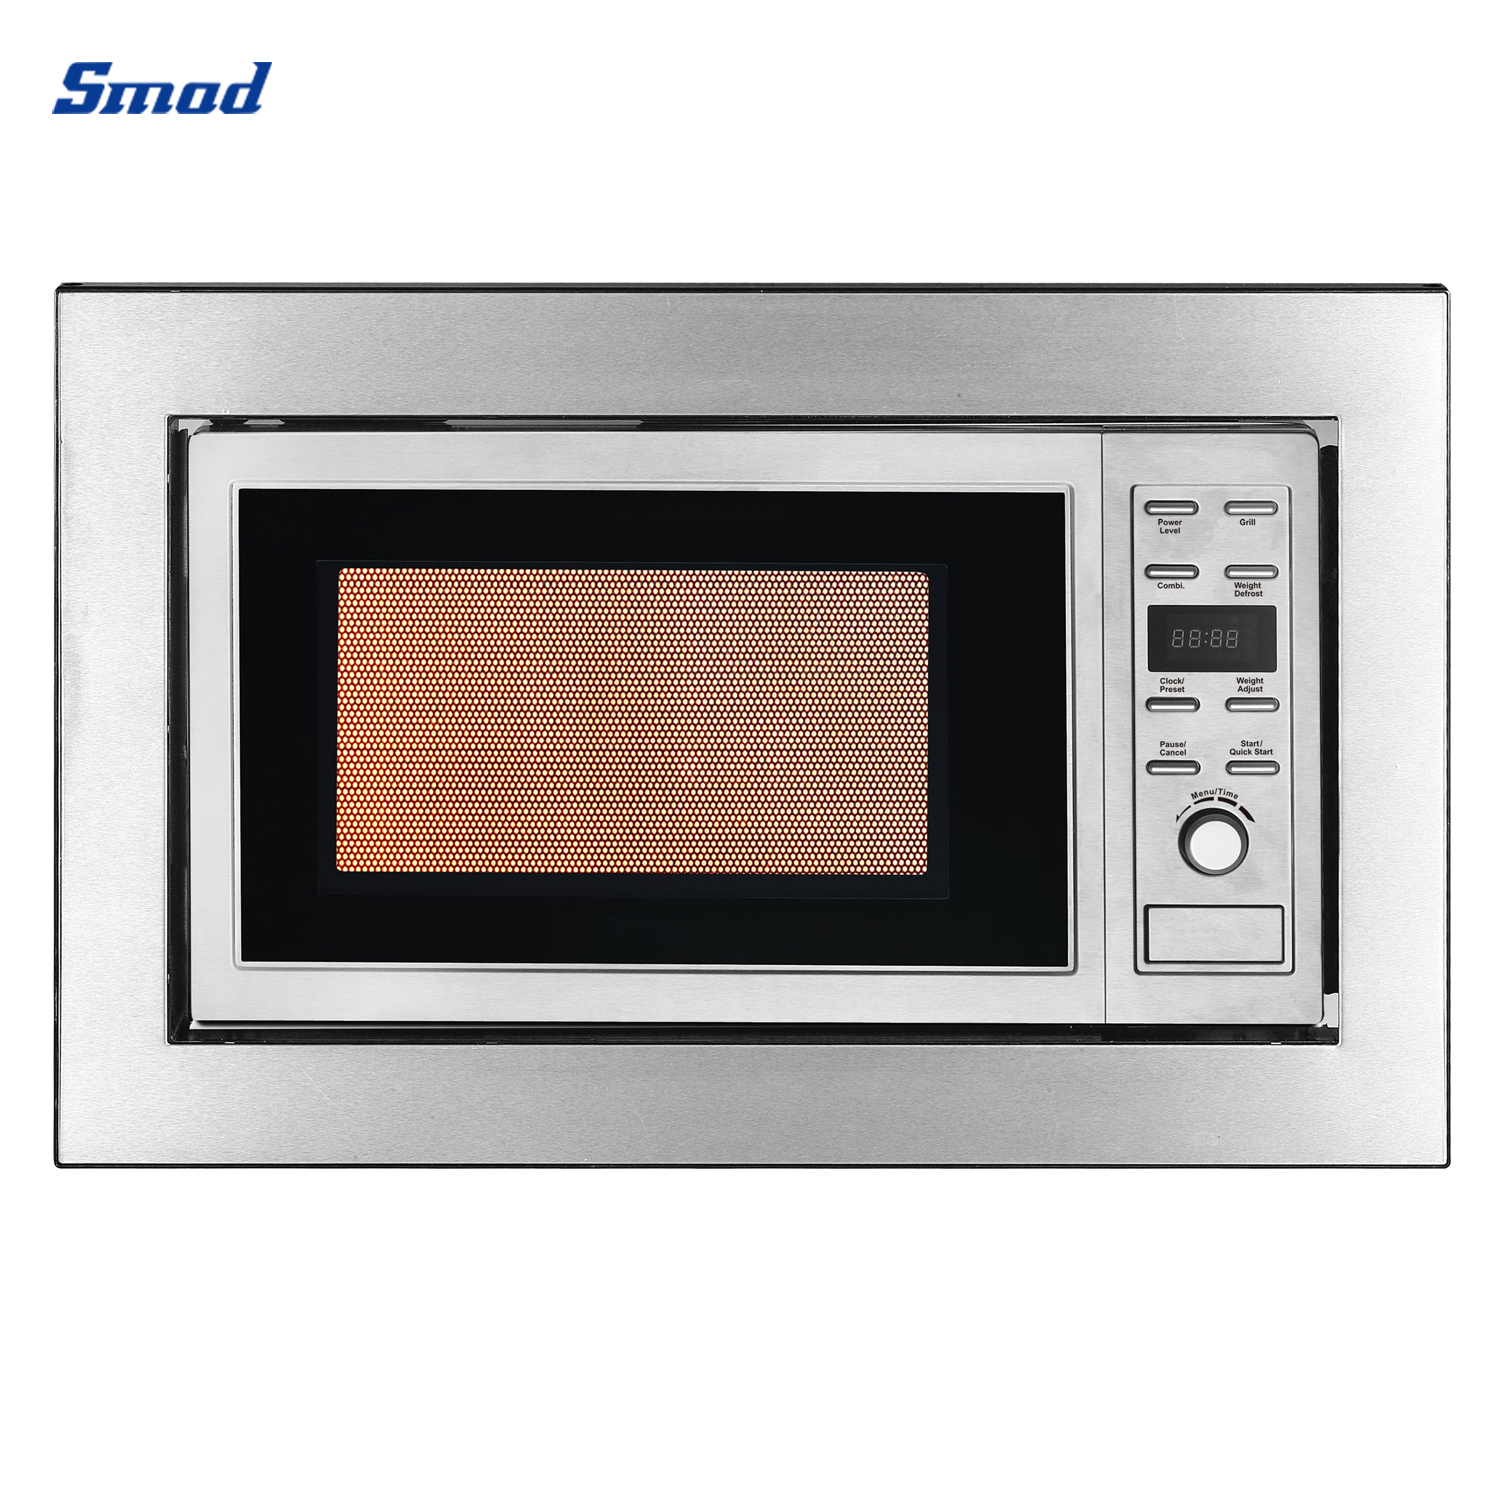 Smad 20L 700W Stainless Steel Built In Microwave Oven with Grill